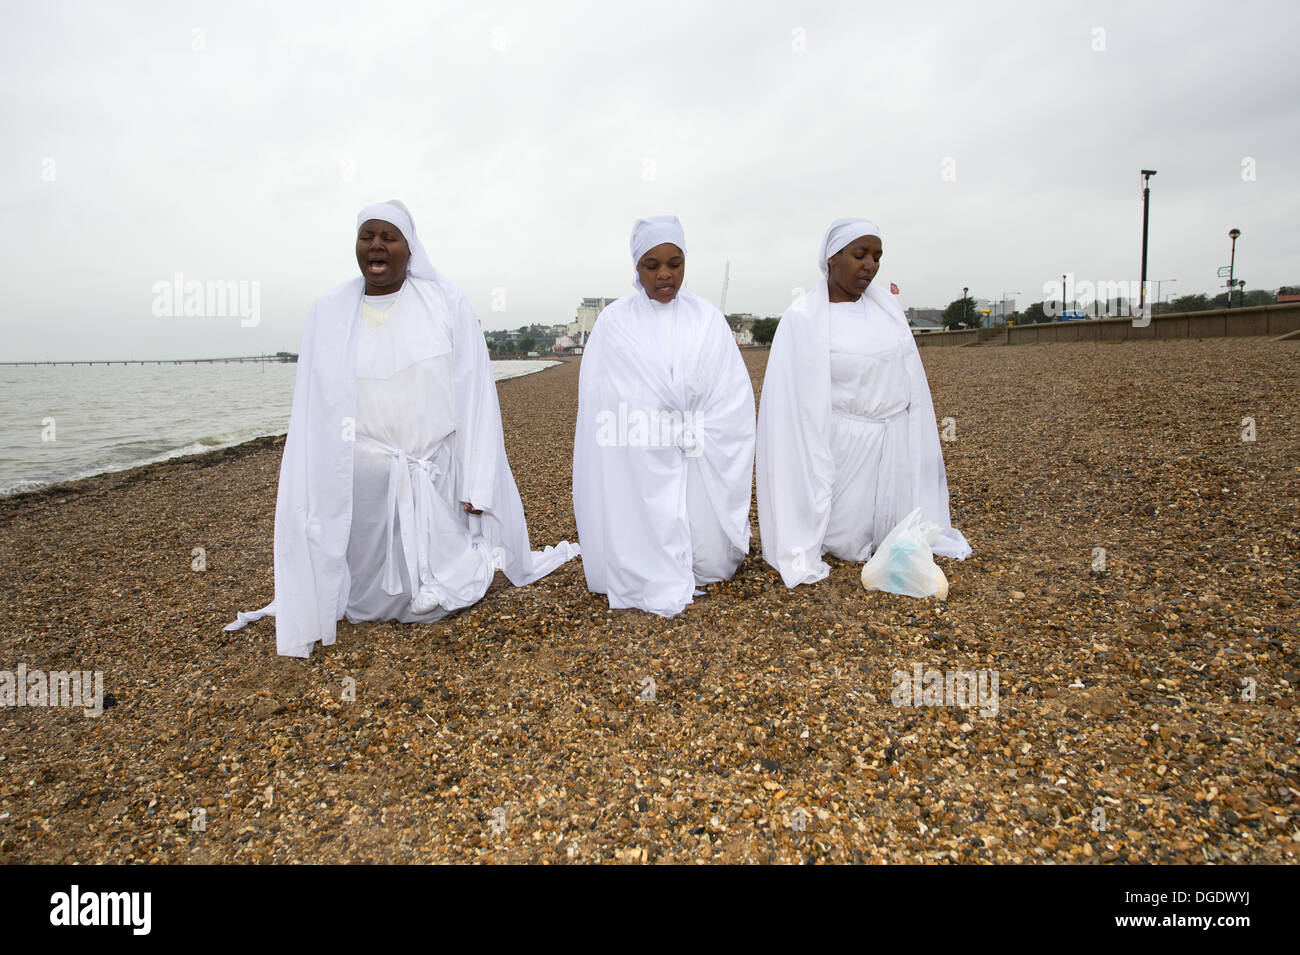 Southend, Essex, UK. 19th October 2013. On the beach at the Essex resort, dark wet weather fails to prevent prayers by the Christian Apostles. An African based religion, praying outside brings the members closer to God. Credit:  Allsorts Stock Photo/Alamy Live News Stock Photo